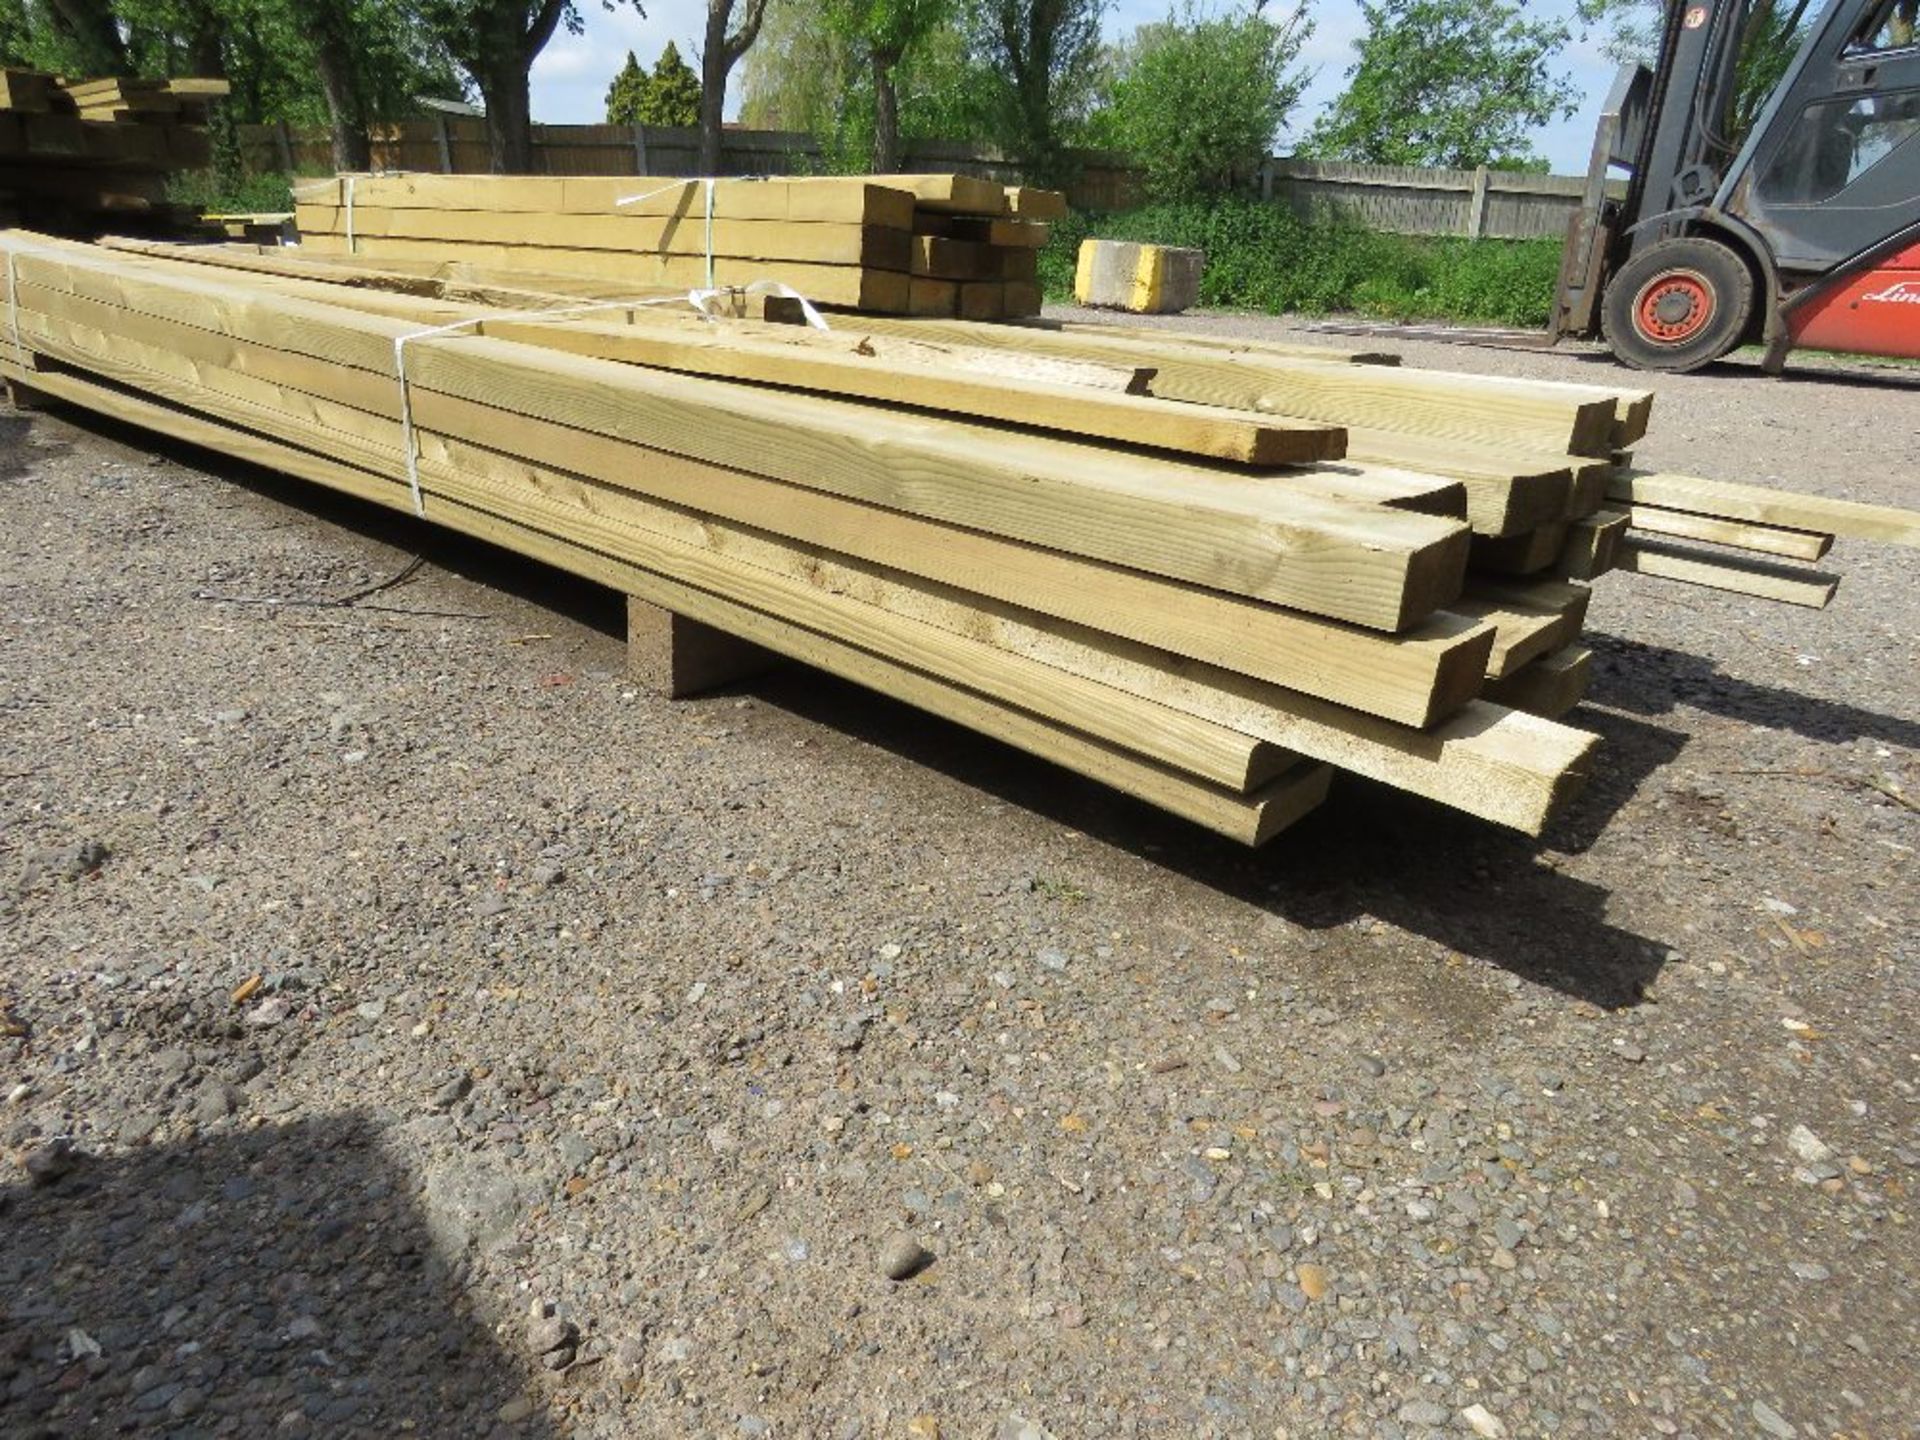 2 X BUNDLES OF TREATED FENCING TIMBERS, POSTS AND BOARDS AS SHOWN, 5-12FT LENGTH APPROX. - Image 4 of 4